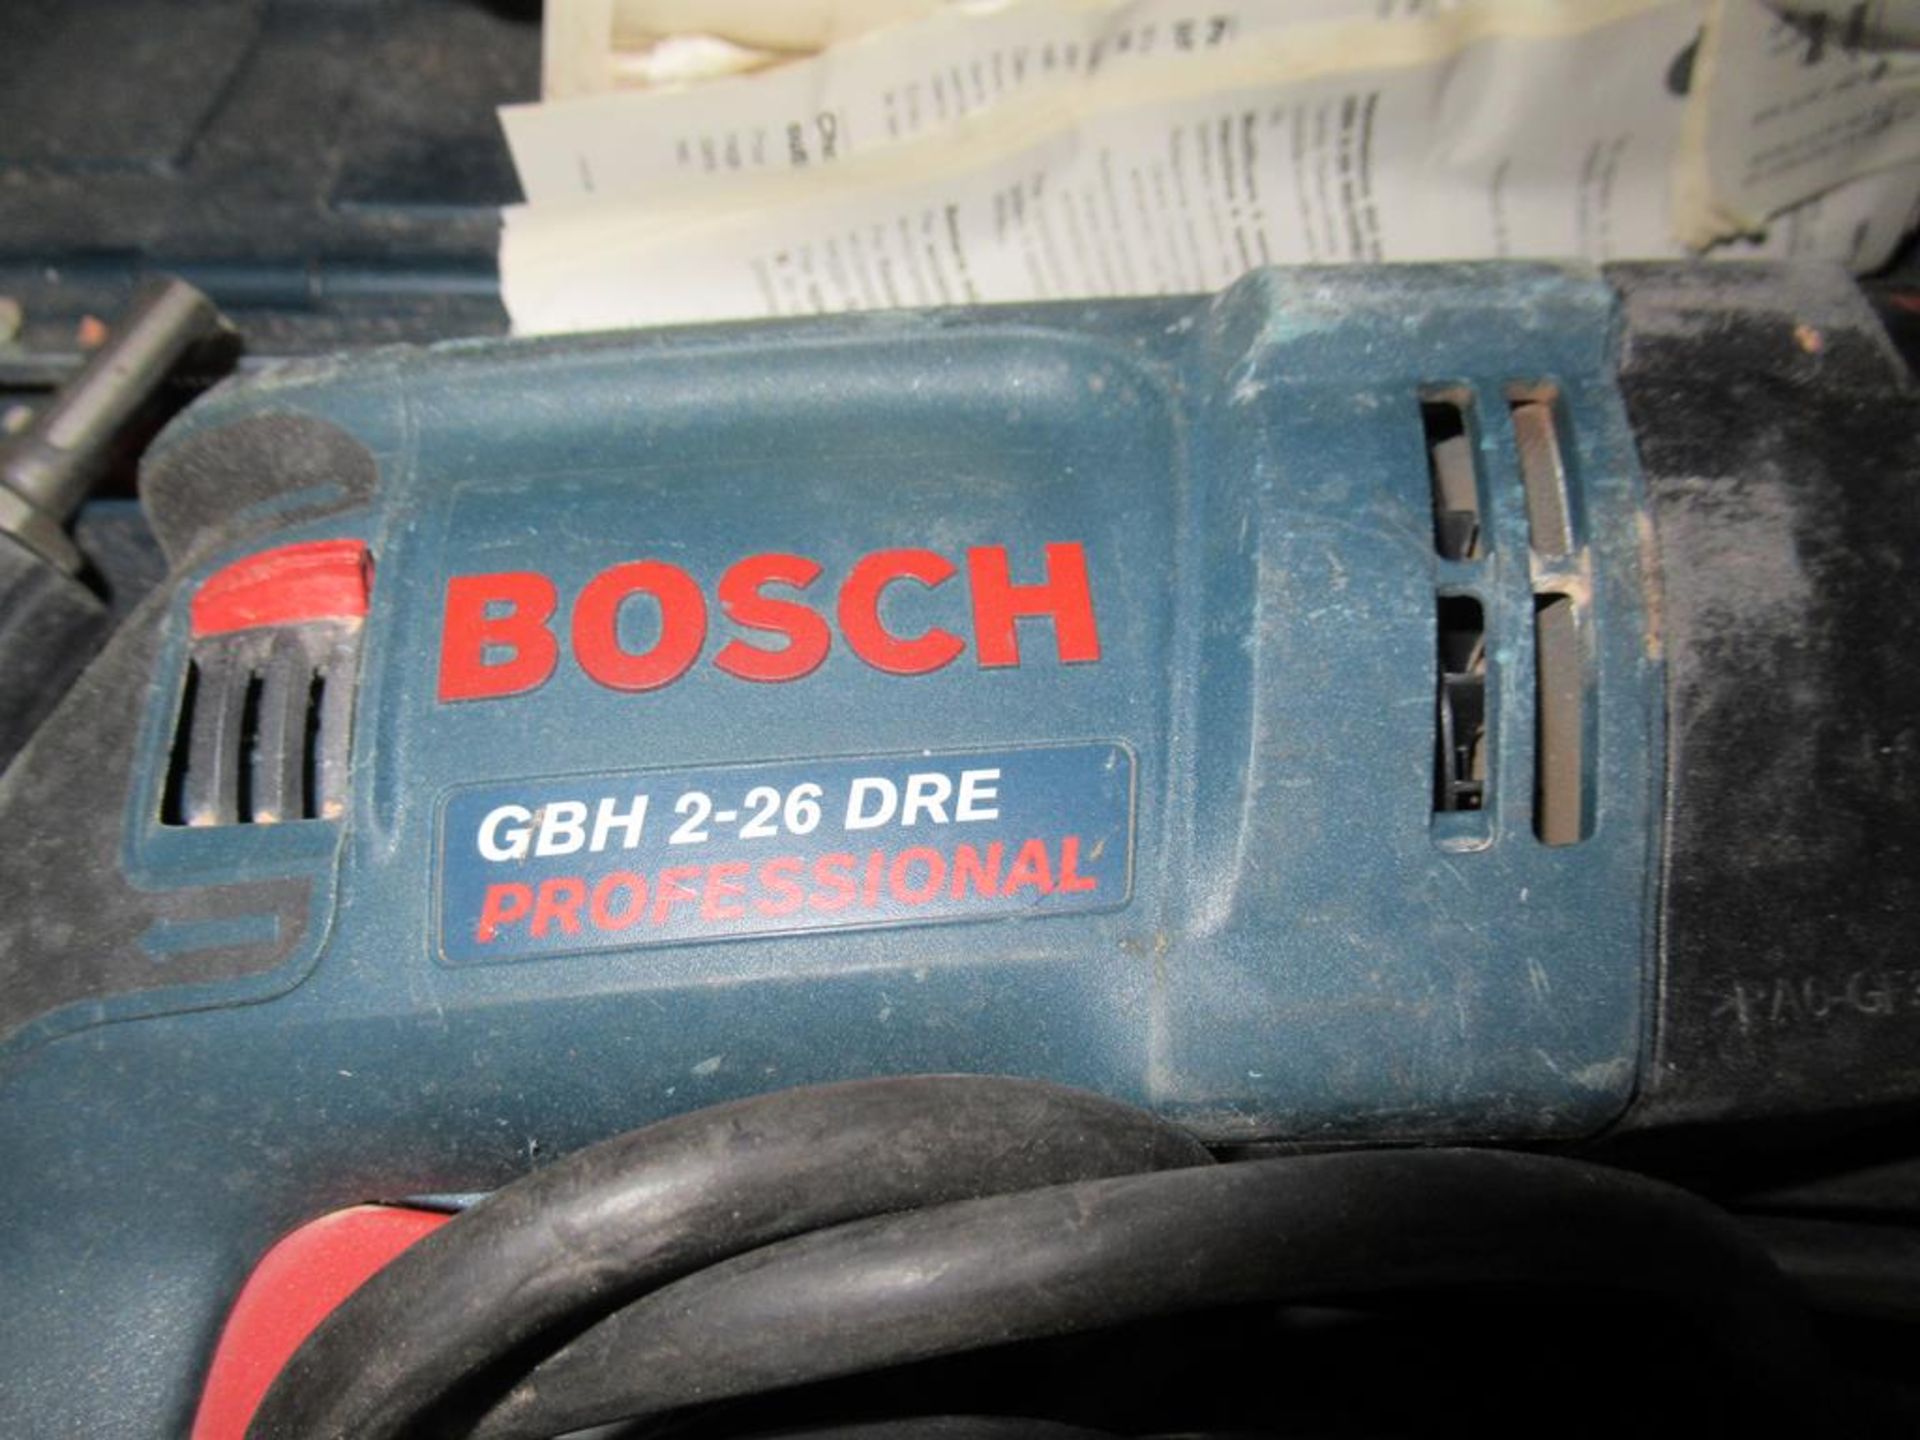 Bosch GBH 2-26 DRE rotary hammer drill in case (110V) - Image 2 of 2